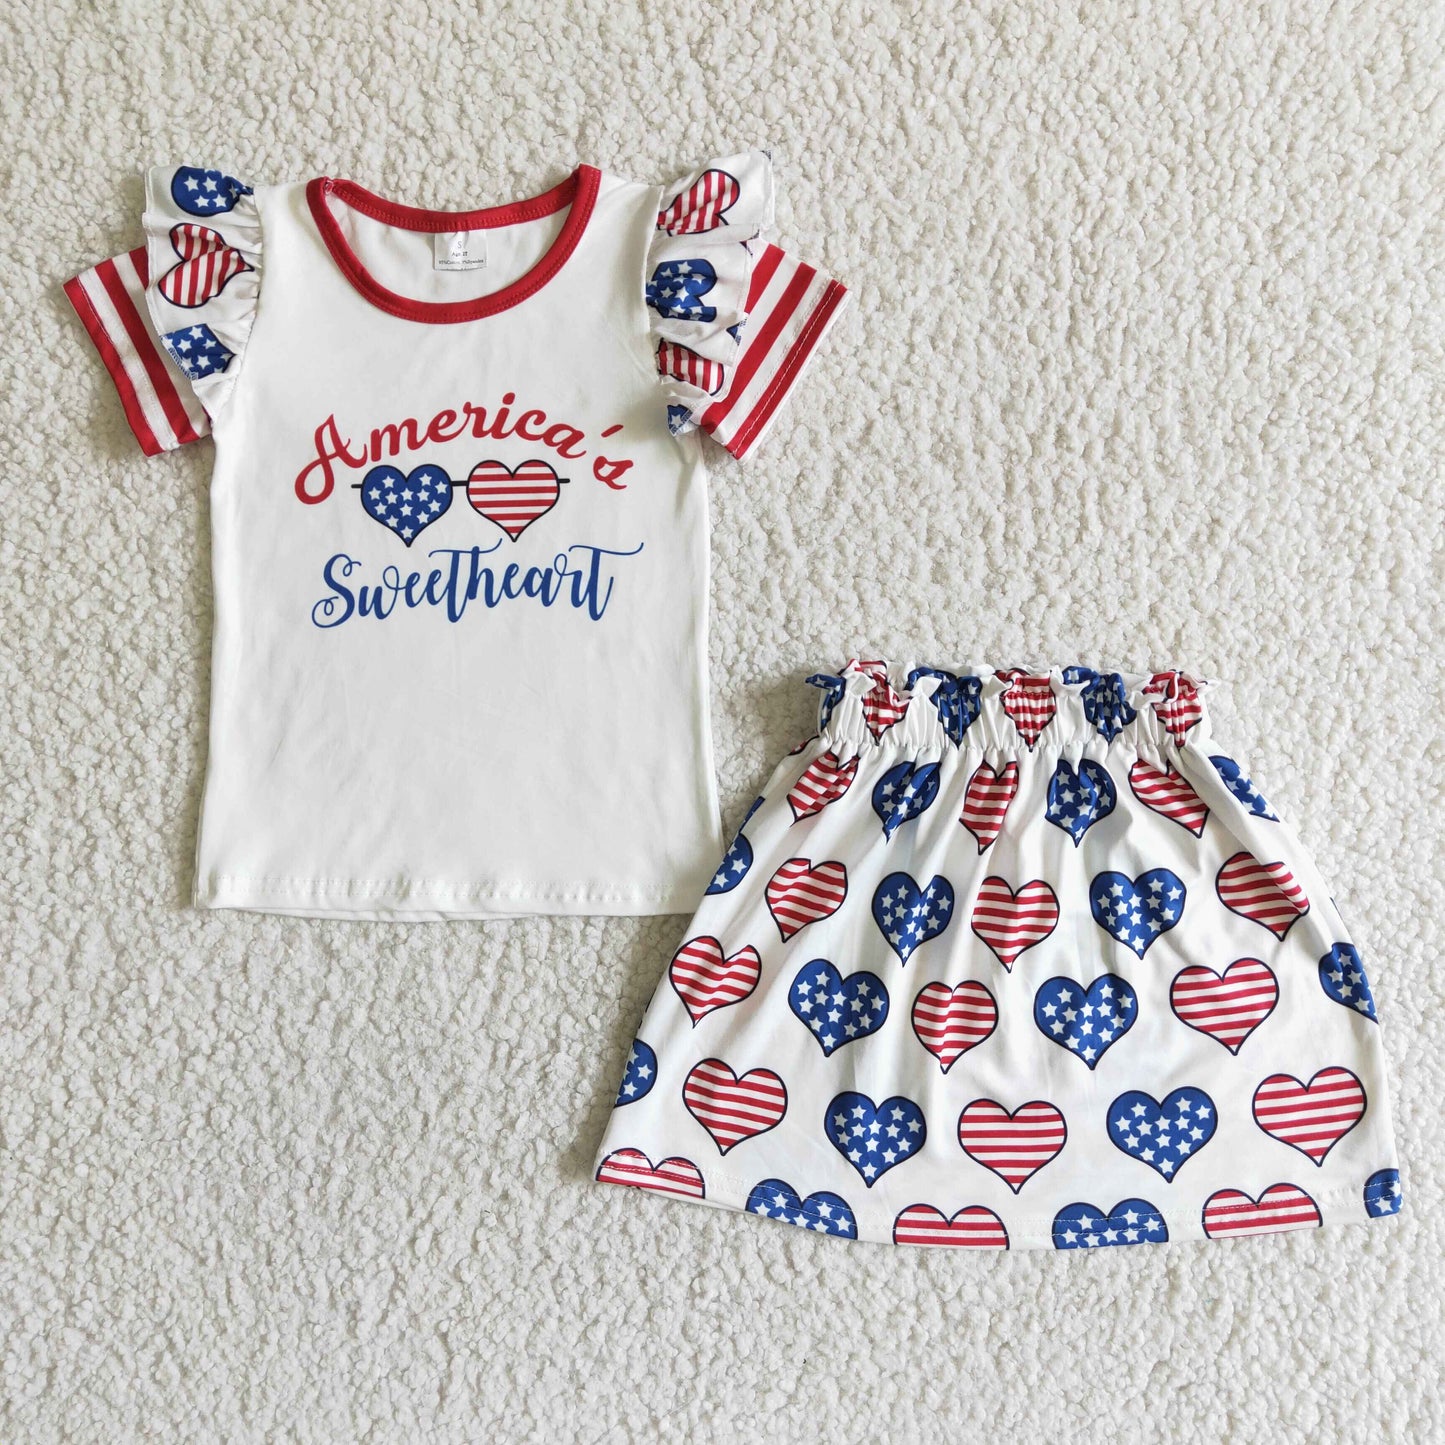 America's sweetheart shirt star stripe heart skirt girls 4th of july outfits